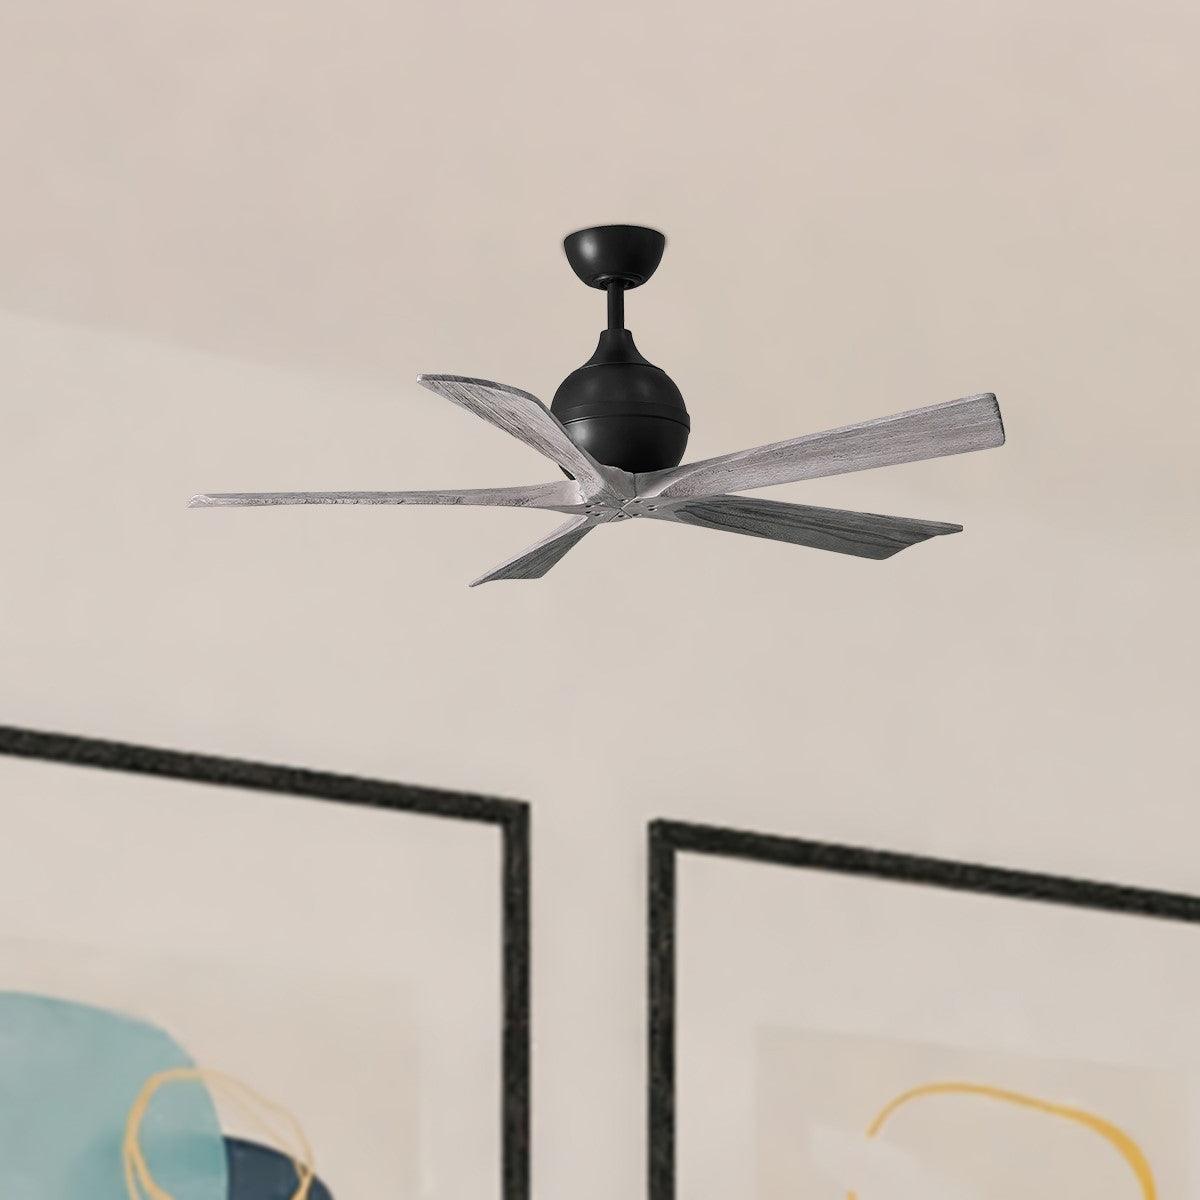 Irene 52 Inch 5 Blades Modern Outdoor Ceiling Fan With Remote And Wall Control